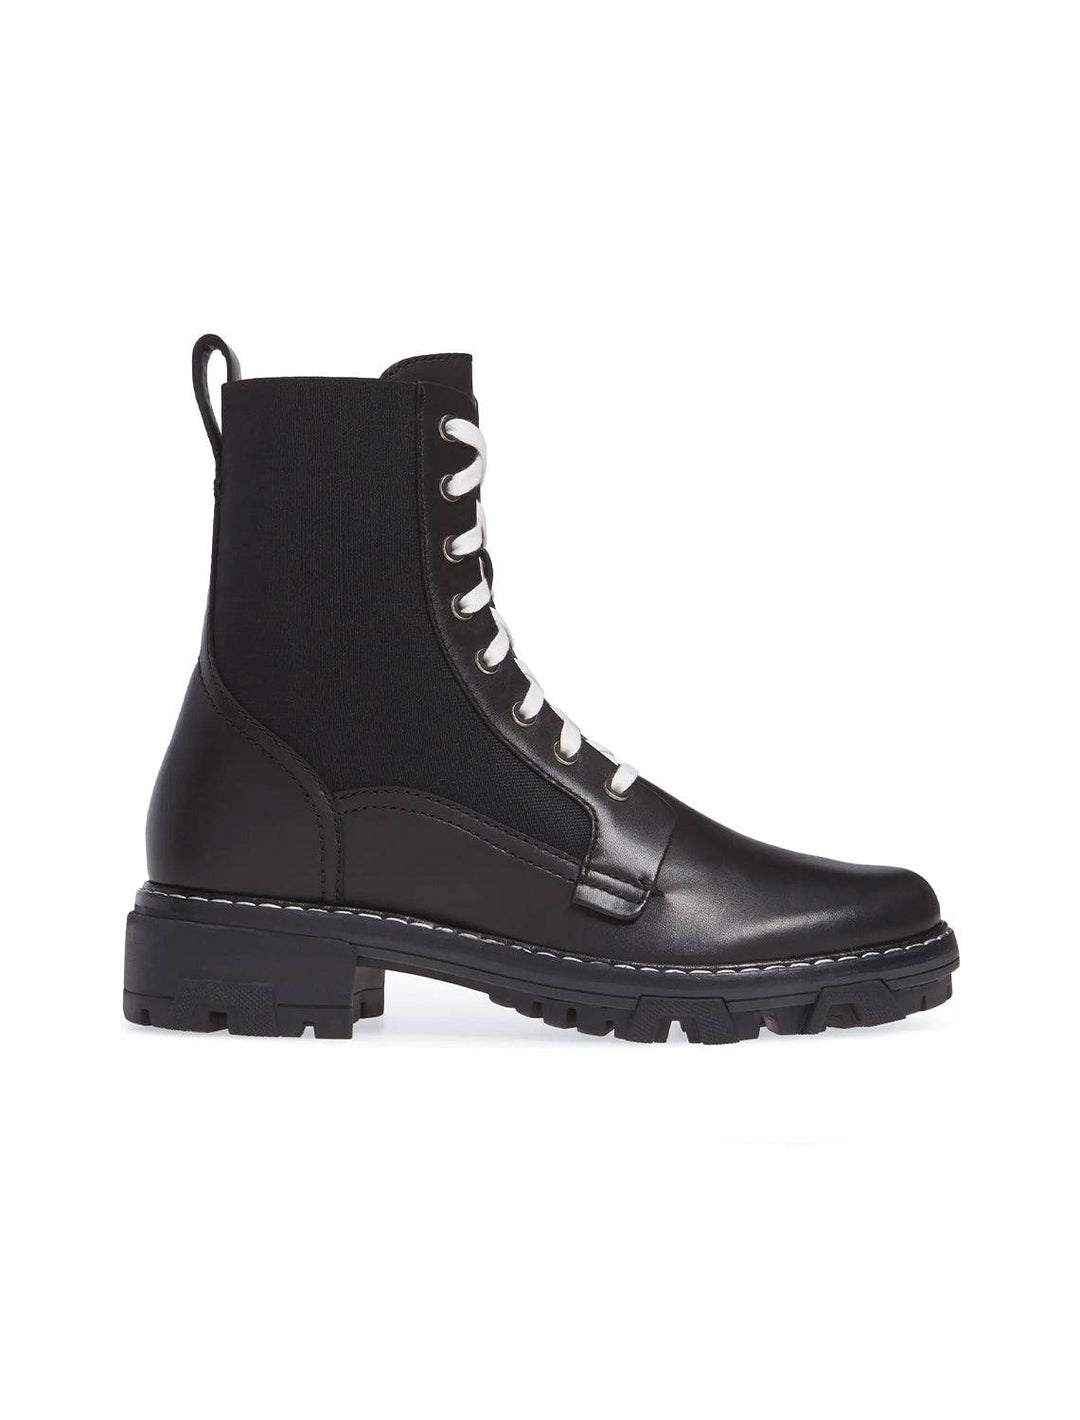 Side view of Rag & Bone's shiloh boots in black.